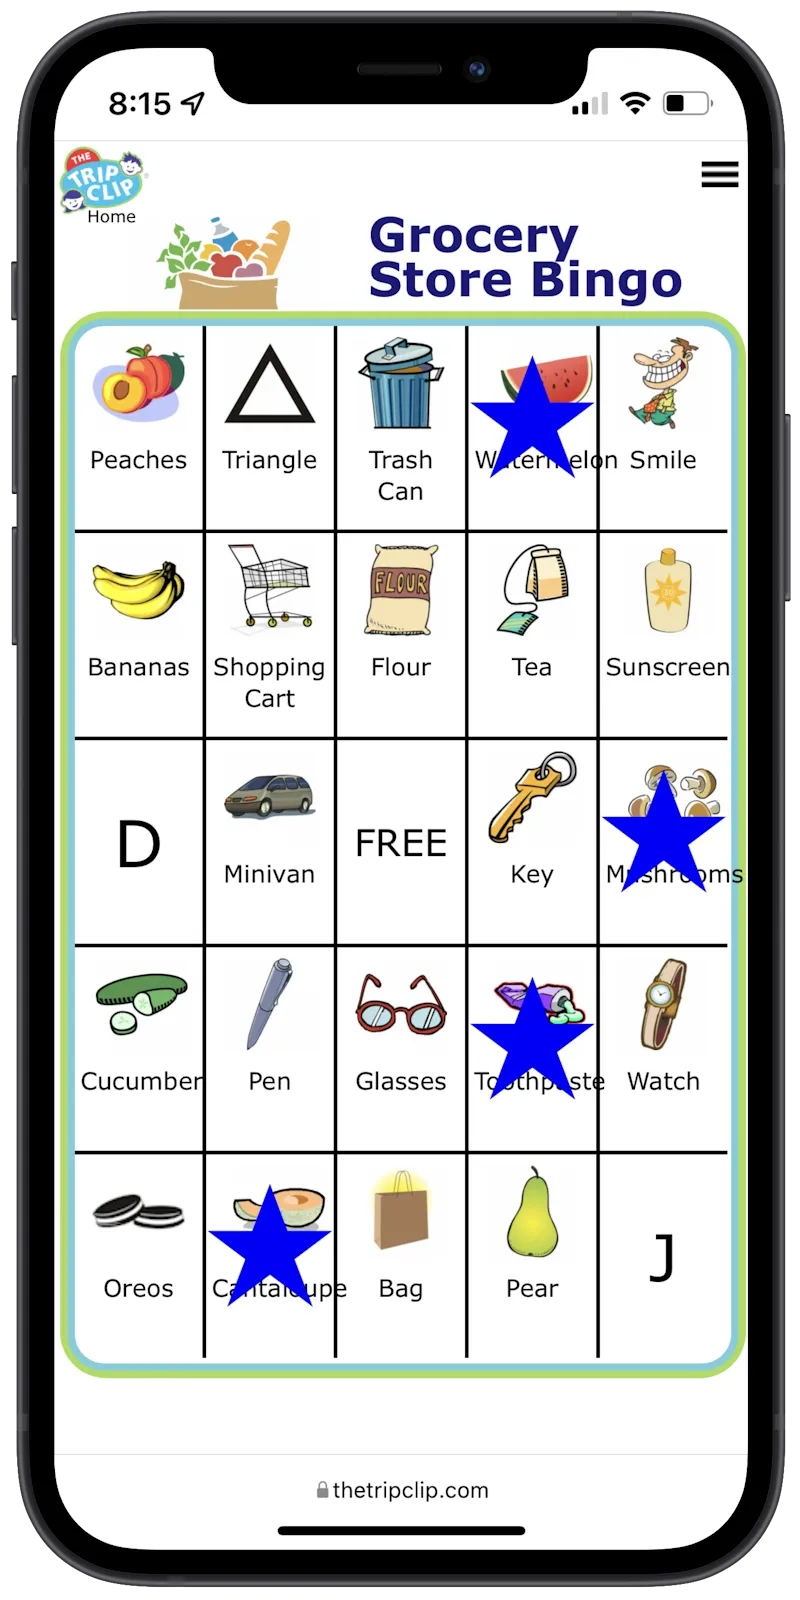 Bingo board on iphone with groceries at the top and titled Grocery Store Bingo